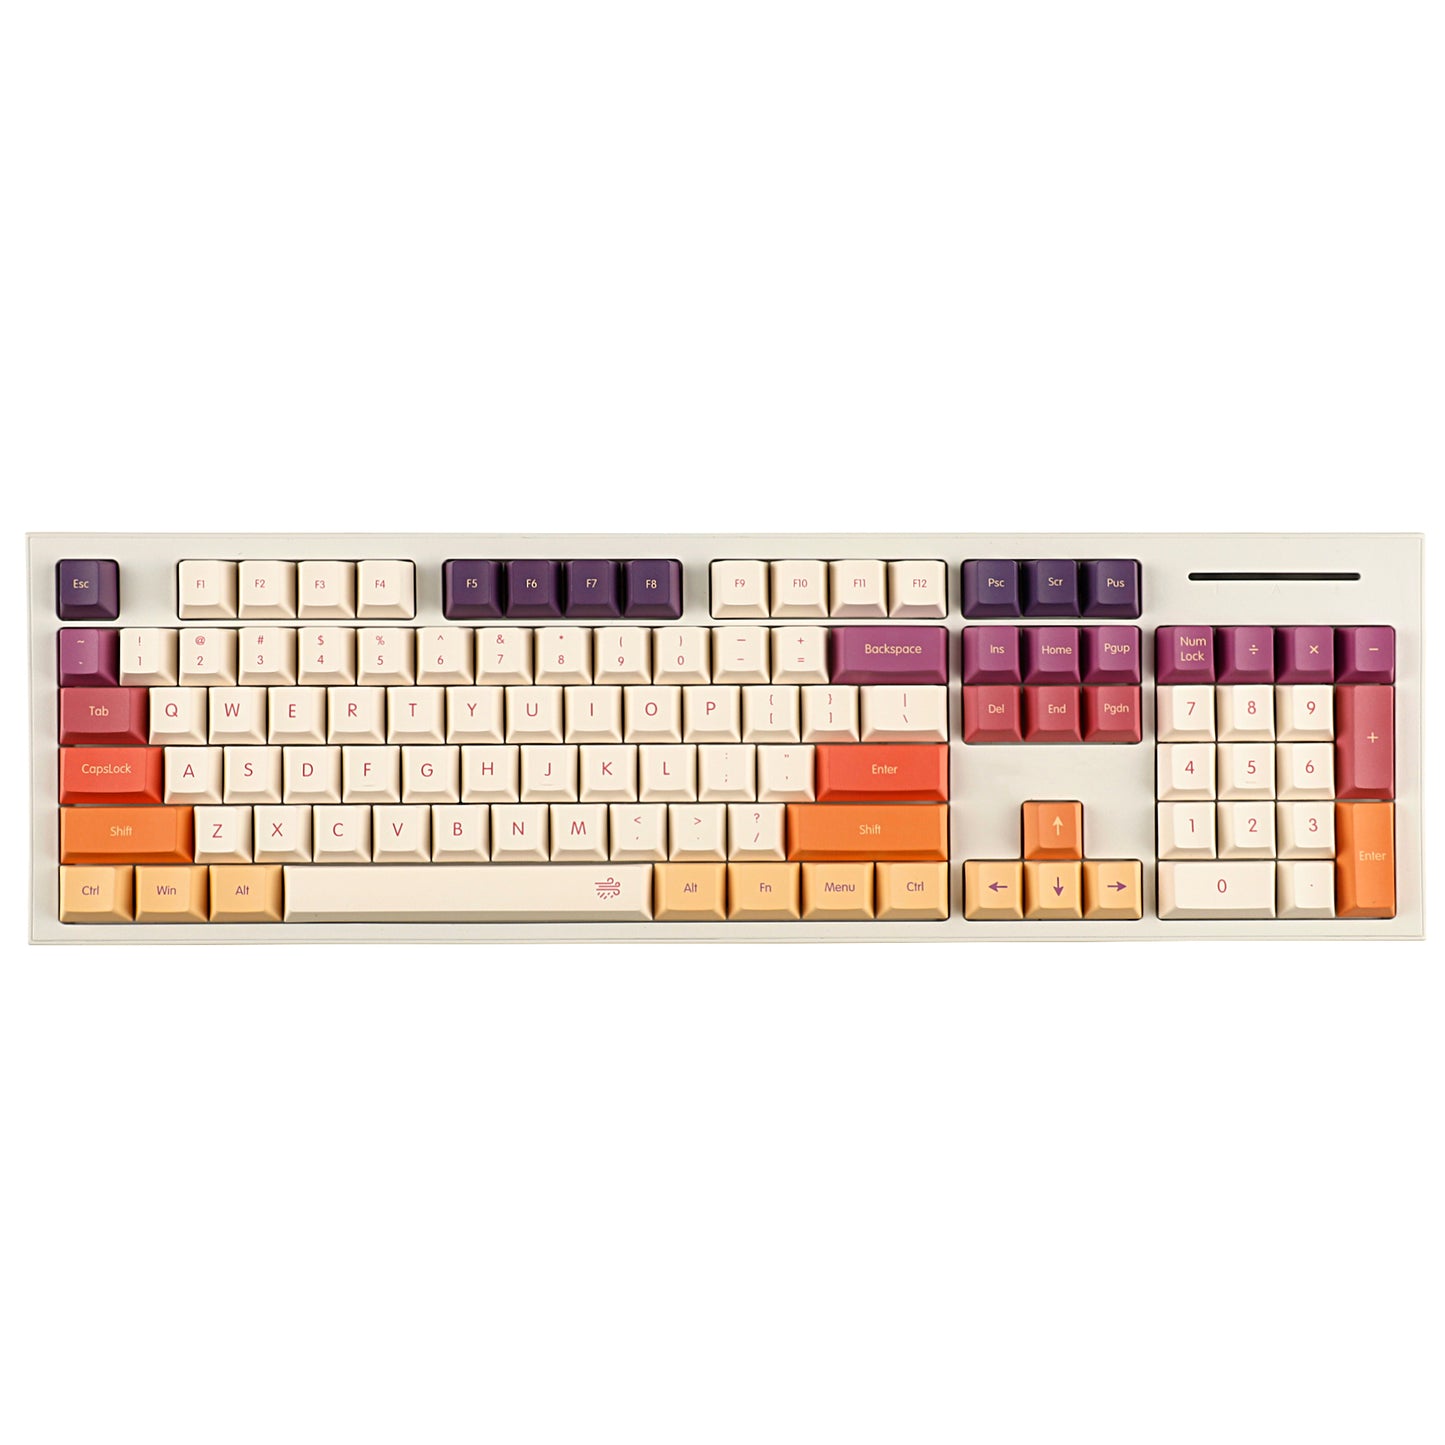 YMDK Cloud German French ISO 1.7mm Thickness Keycaps Thick Keycap set For QWERTZ AZERTY MX Keyboard（Cherry Profile Dye Sub PBT）